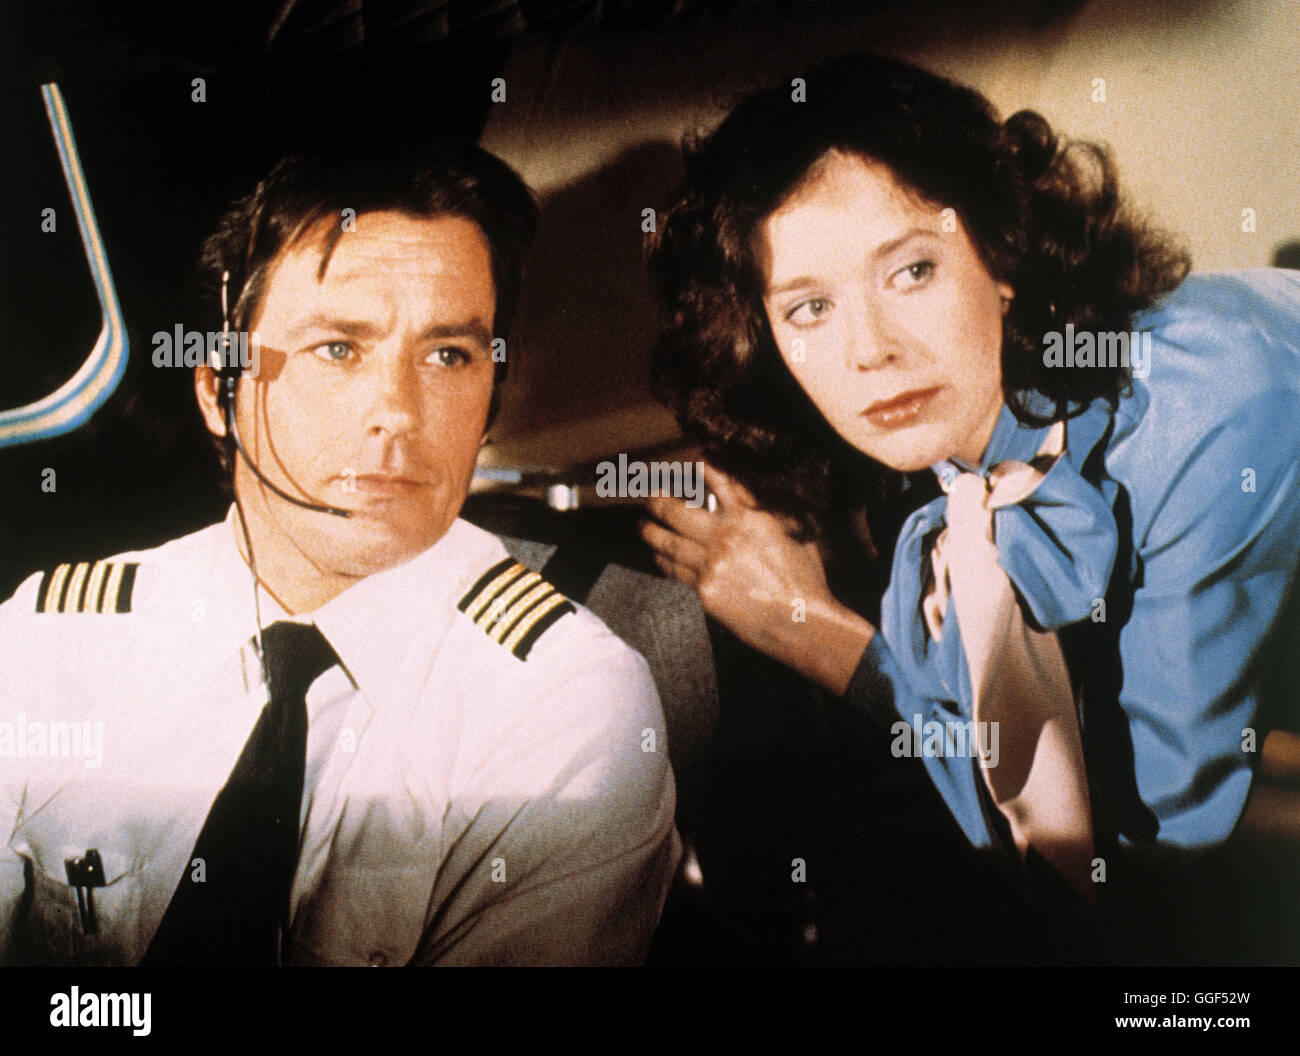 AIRPORT '80 - DIE CONCORDE / The Concorde - Airport '79 USA 1979 / David Lowell Rich ALAIN DELON (Paul Metrand), SYLVIA KRISTEL (Isabelle) Regie: David Lowell Rich aka. The Concorde - Airport '79 Stock Photo